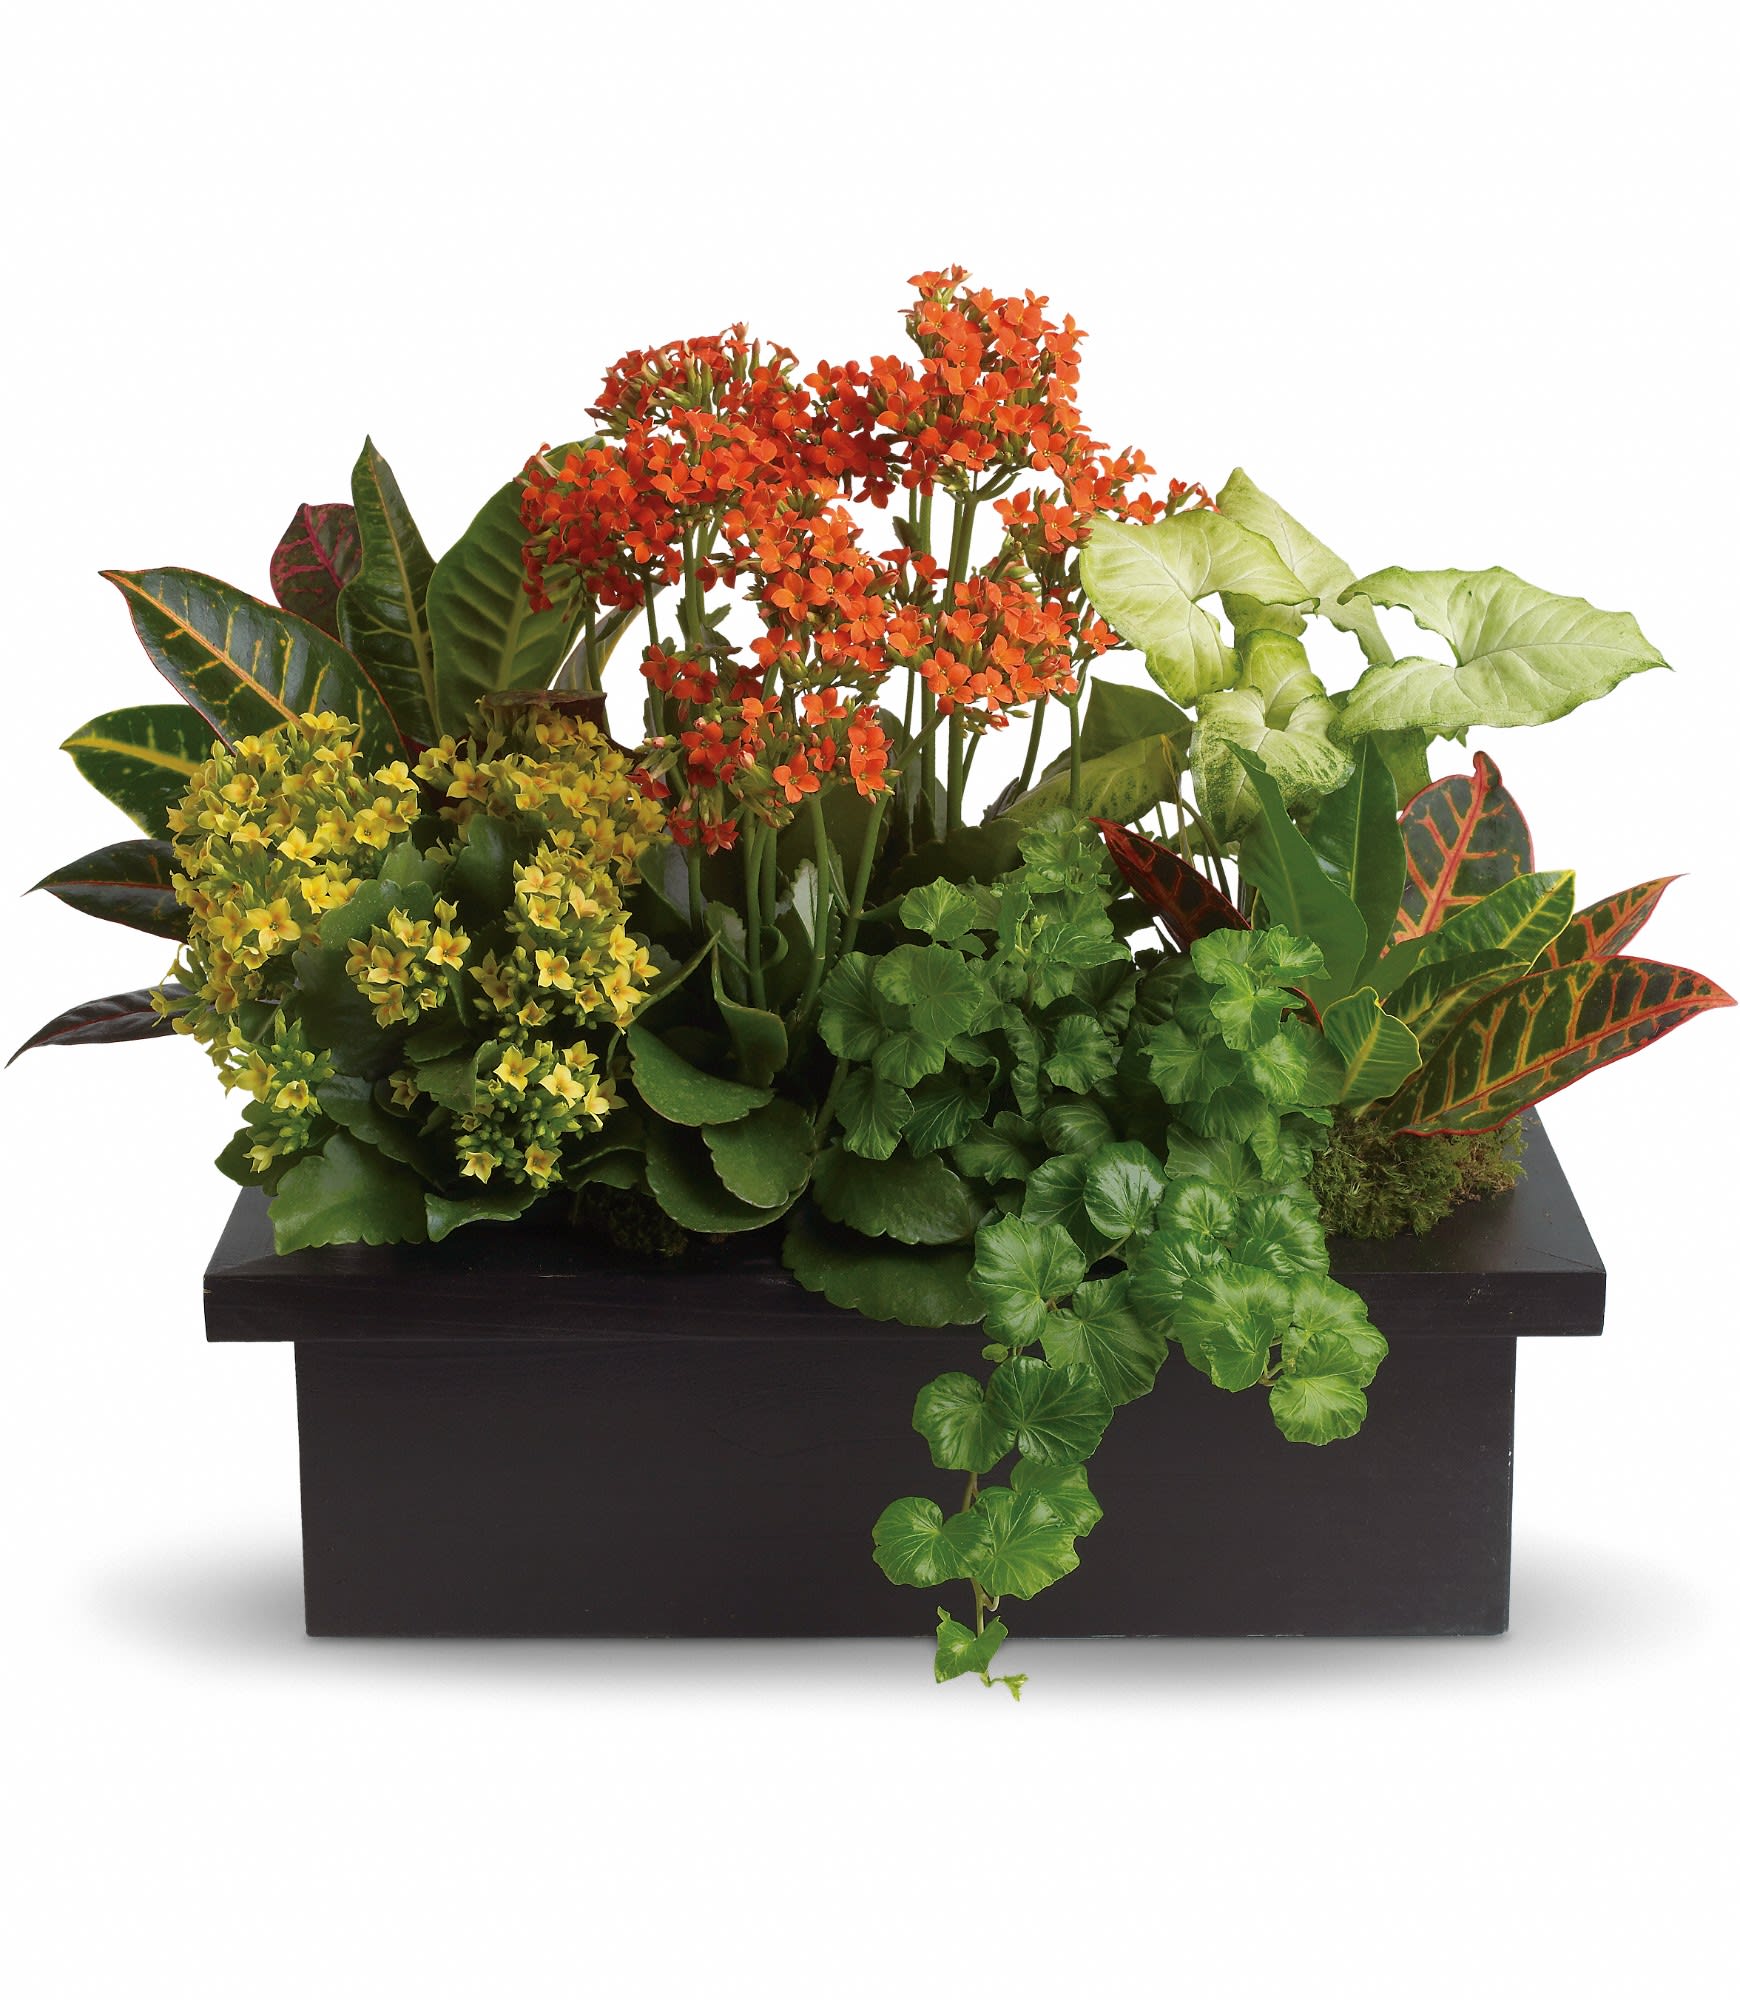 Stylish Plant Assortment - What a magical mix of flowering and green plants! This stylish plant assortment is simply stunning. The mix of colors and textures will make any room come alive!  Goldfinger crotons, bright yellow and orange kalanchoes along with green nephthytis and ivy are delivered in a modern black container. Stylish beyond words!  Approximately 23&quot; W x 18&quot; H  Orientation: All-Around      As Shown : T106-3A  